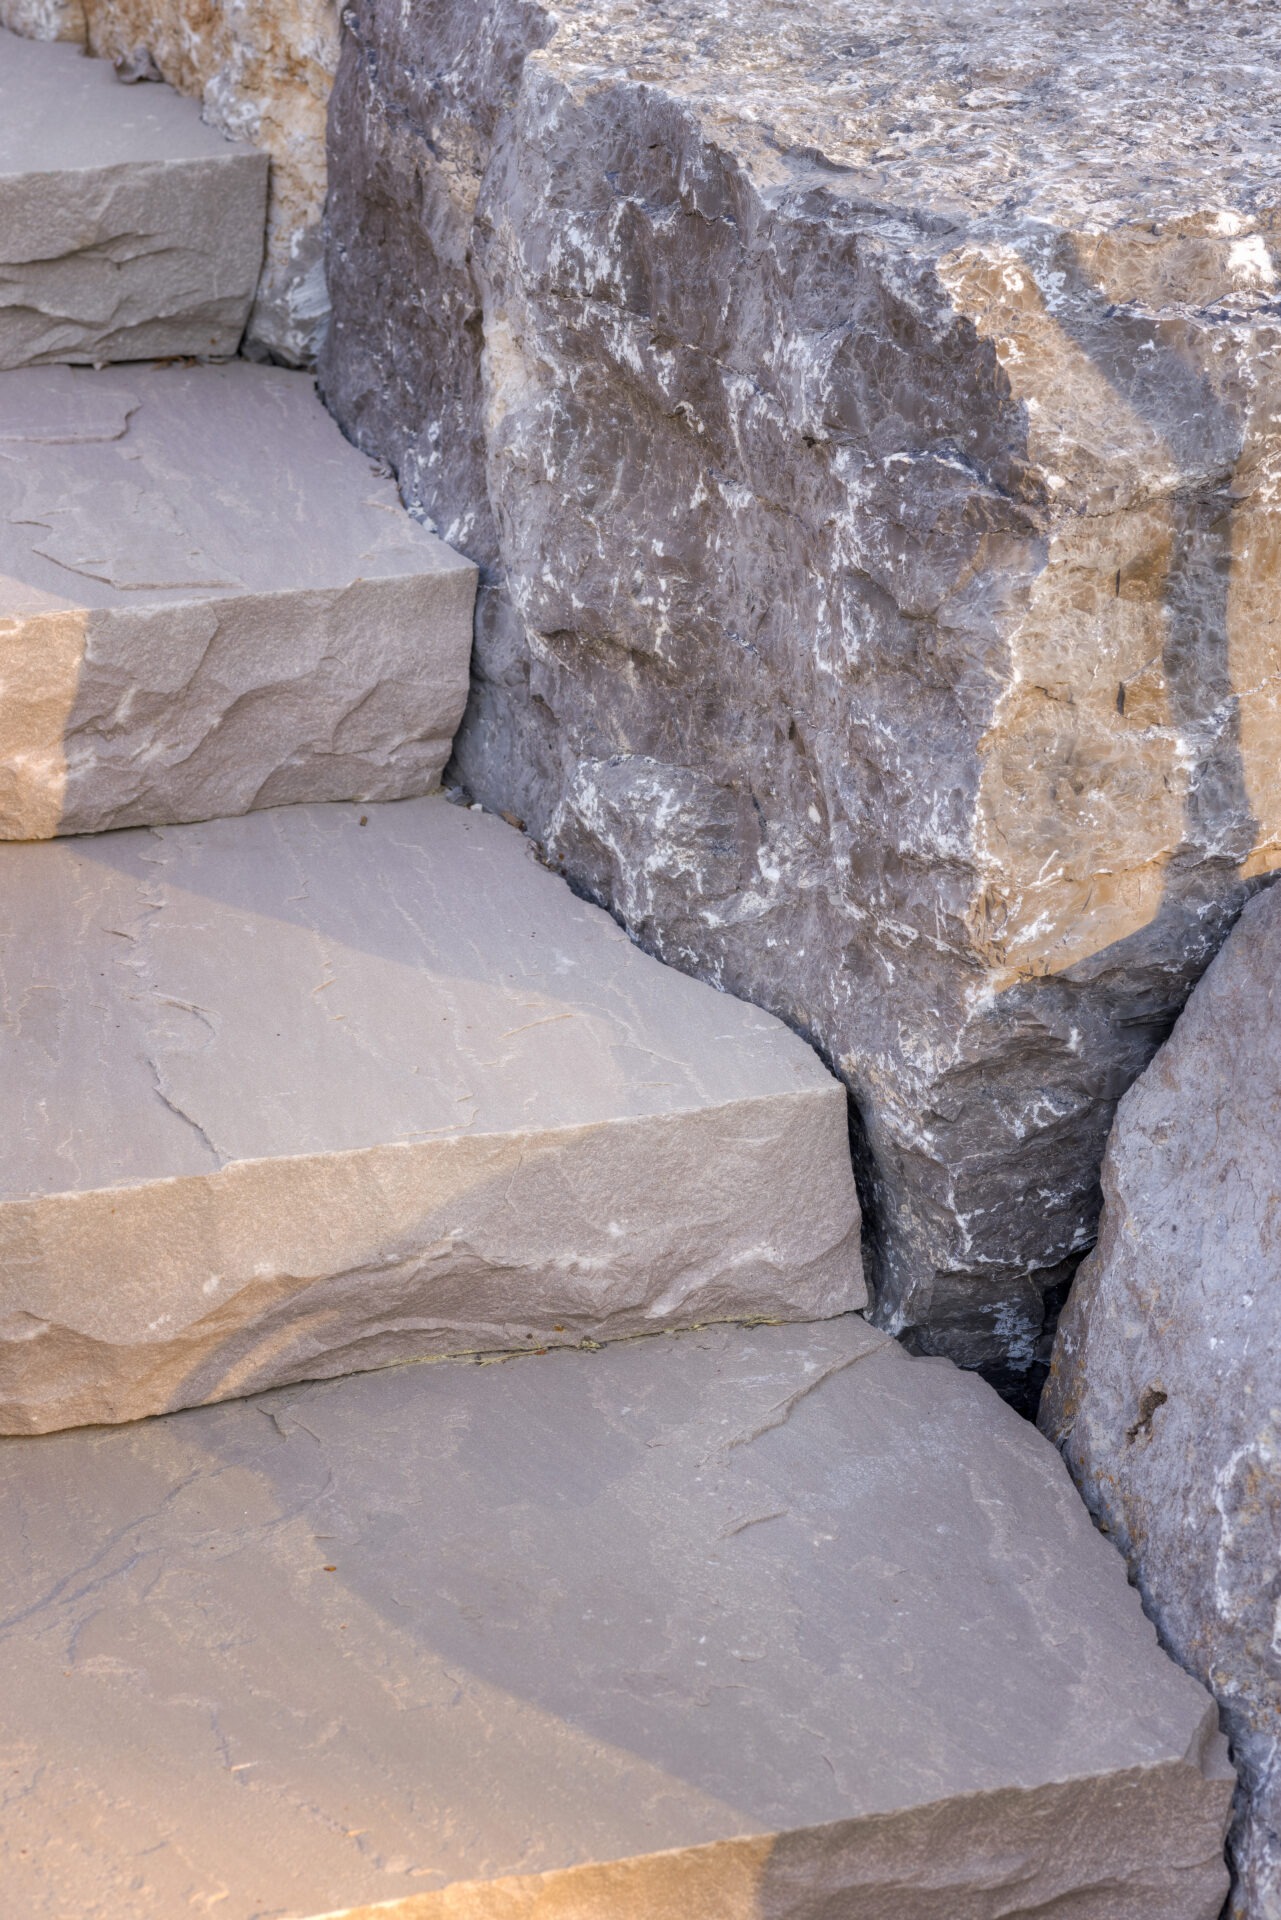 This image depicts a close-up view of stone steps, showcasing varying shades of gray and textures, with natural sunlight casting shadows on the surfaces.